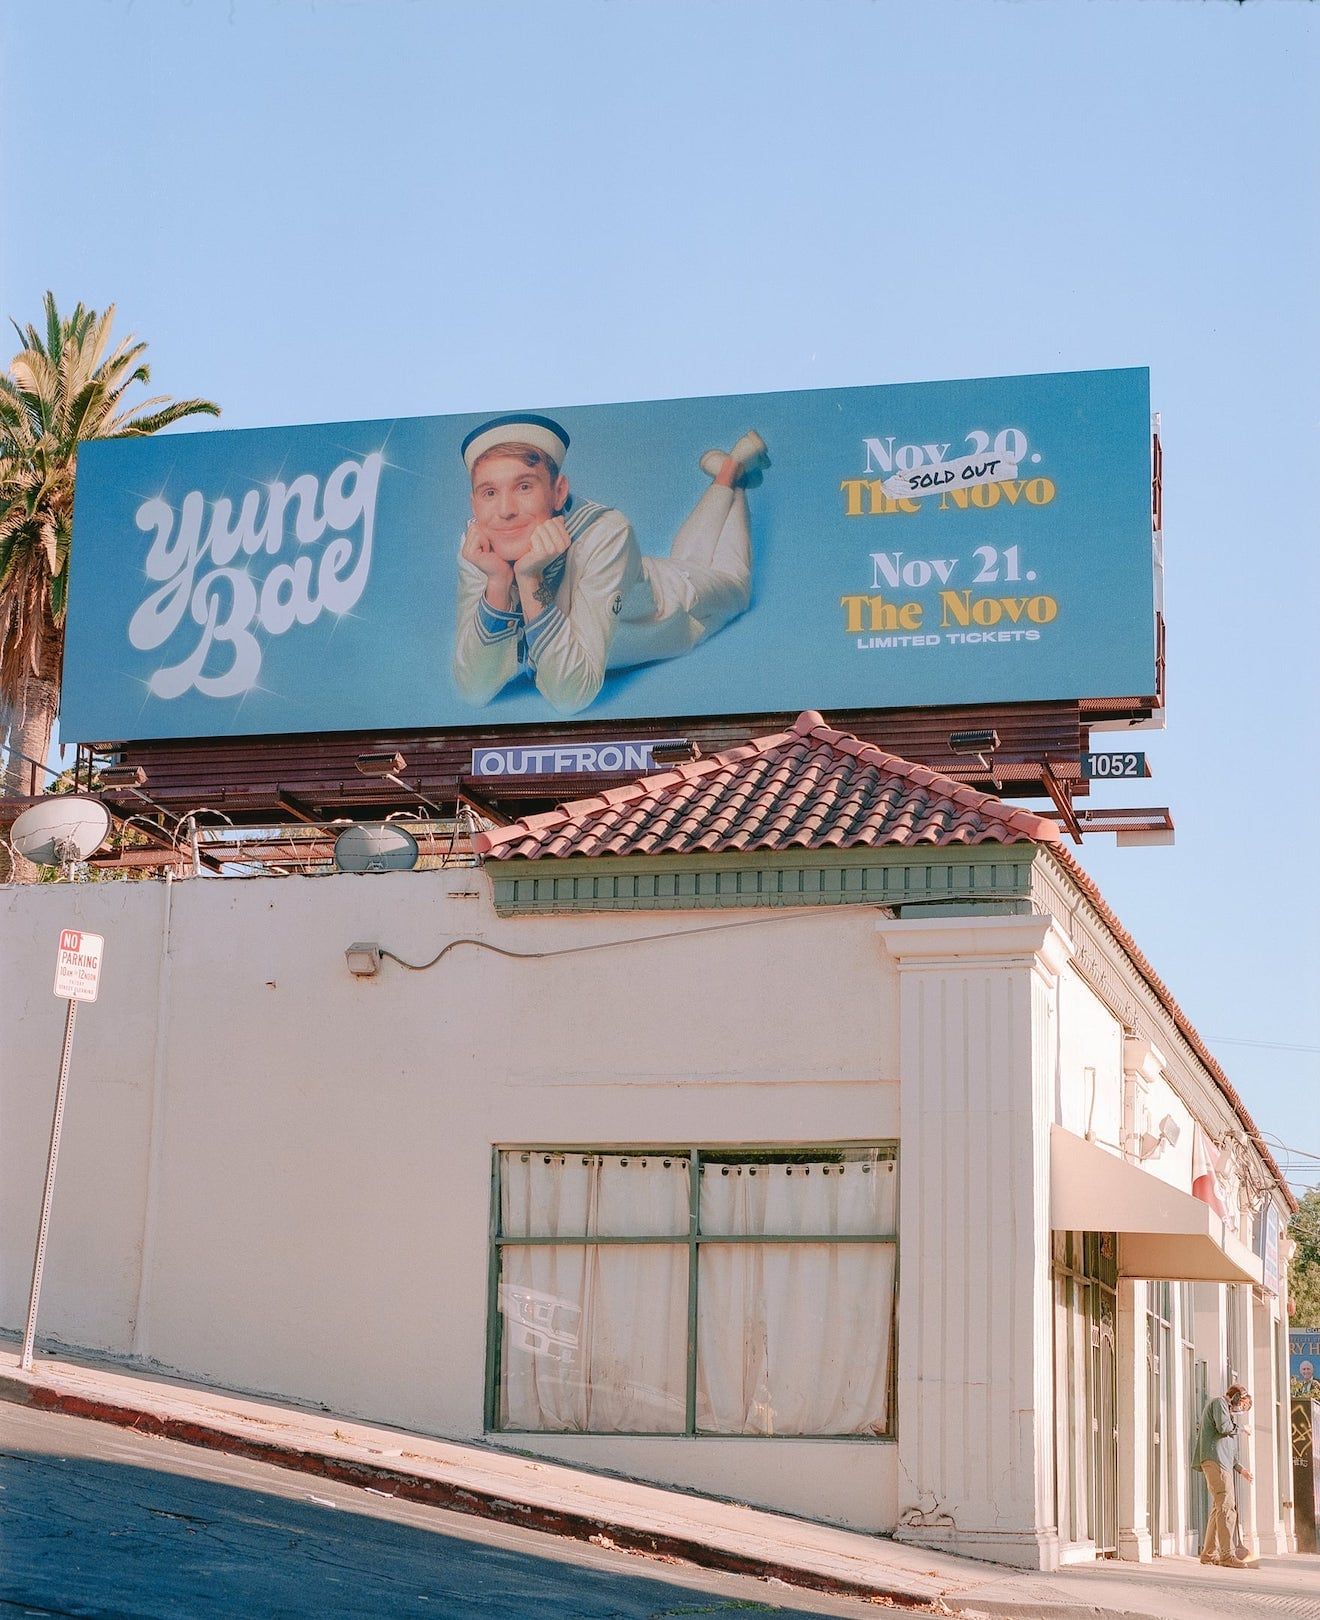 A billboard in LA featuring a smiling Yung Bae in a sailor outfit laying on the ground facing the camera with his head propped up on his hands. To his left is his name drawn in a groovy script and to the right are two dates for upcoming shows.